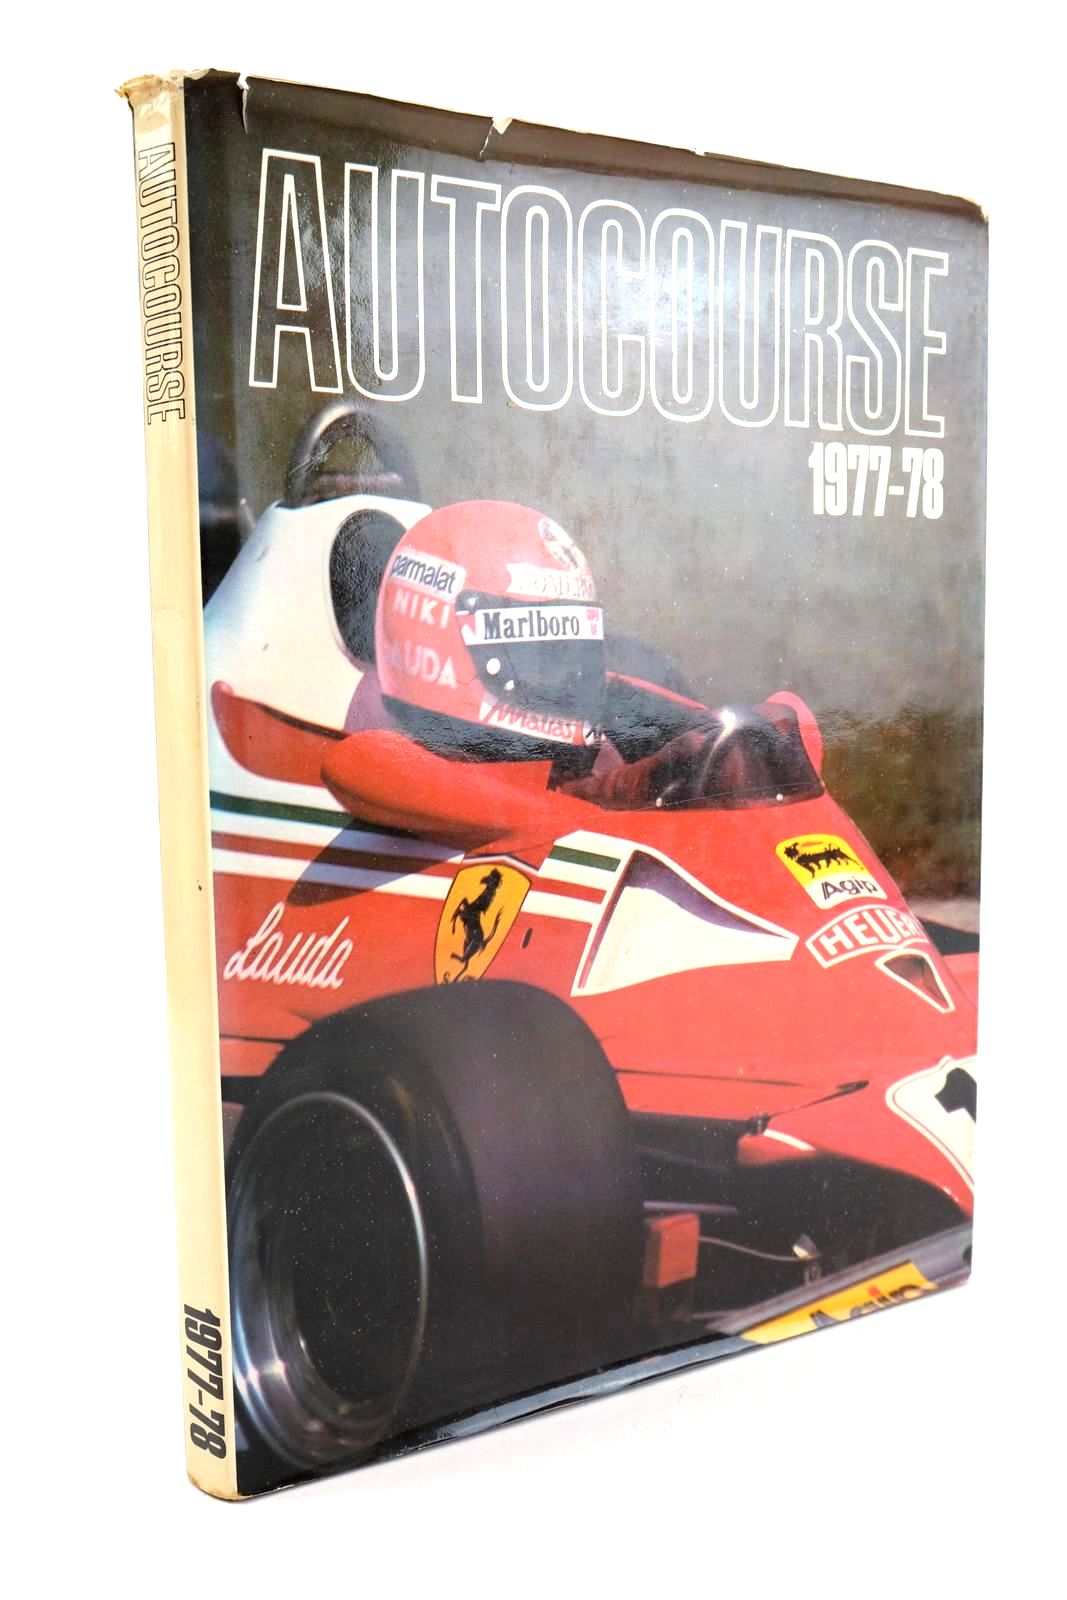 Photo of AUTOCOURSE 1977-78 written by Kettlewell, Mike published by Hazleton Securities (STOCK CODE: 1325088)  for sale by Stella & Rose's Books